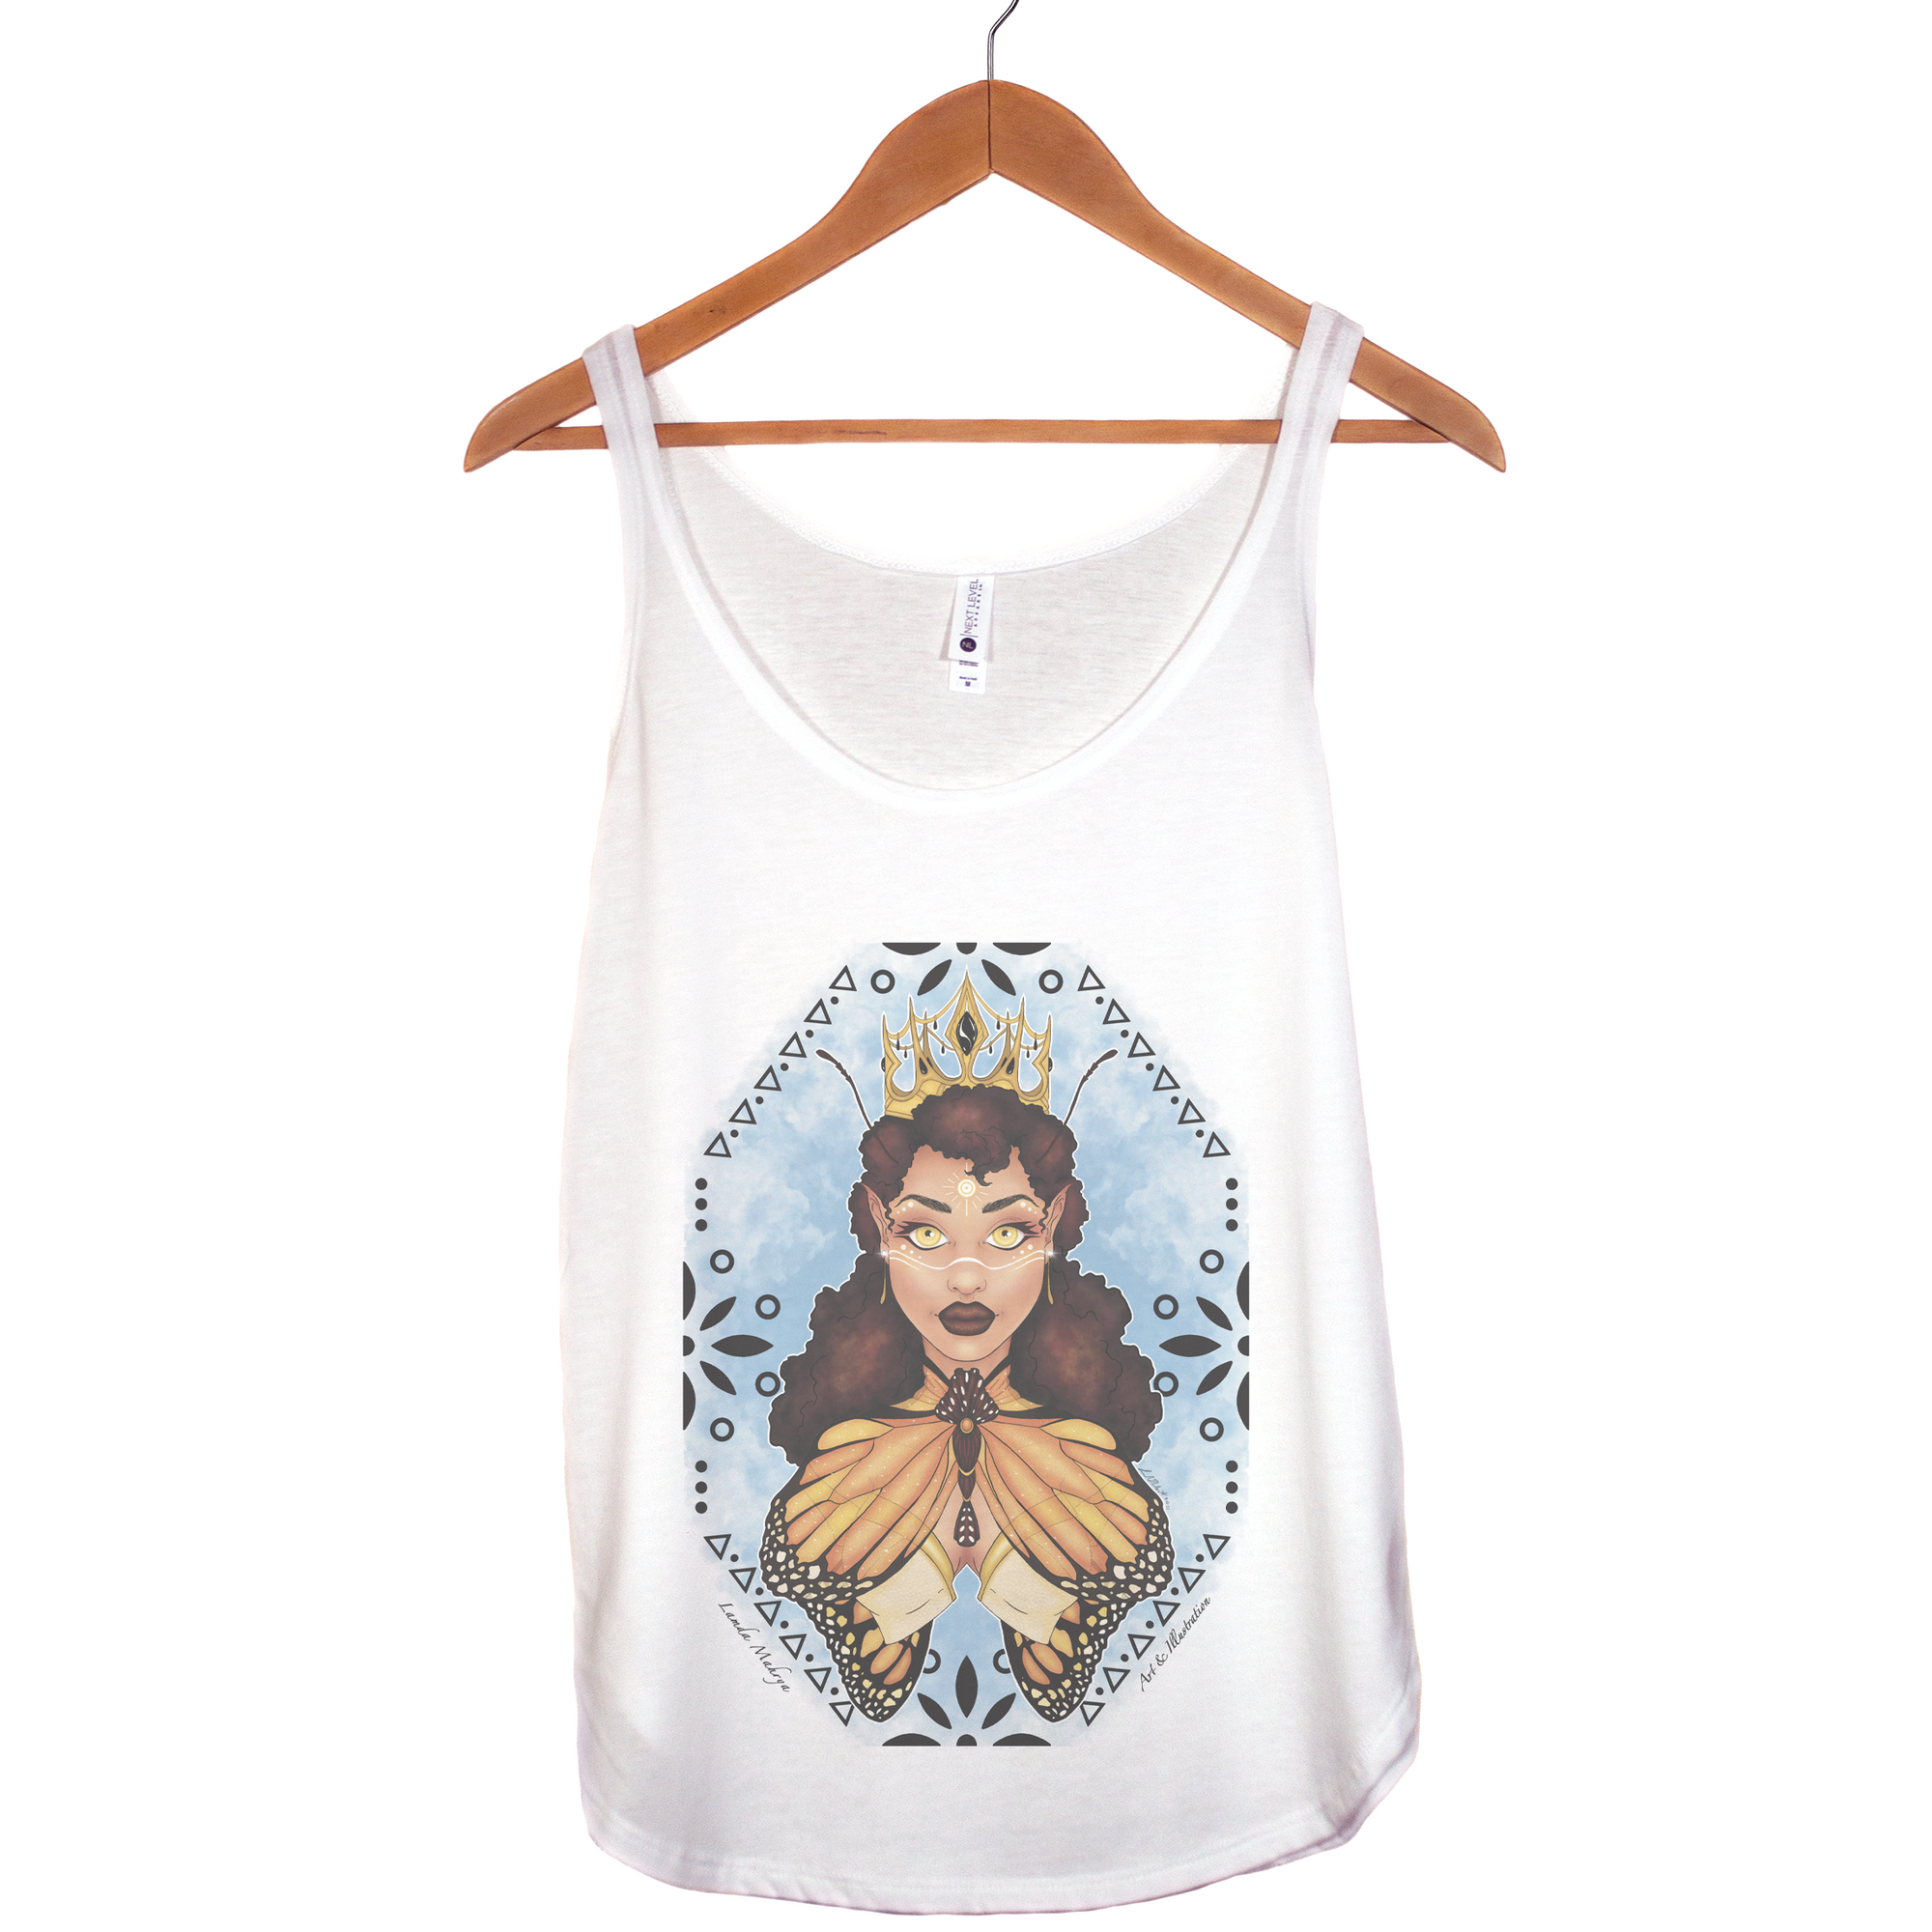 "Monarch's Intuition" - Triblend Tank